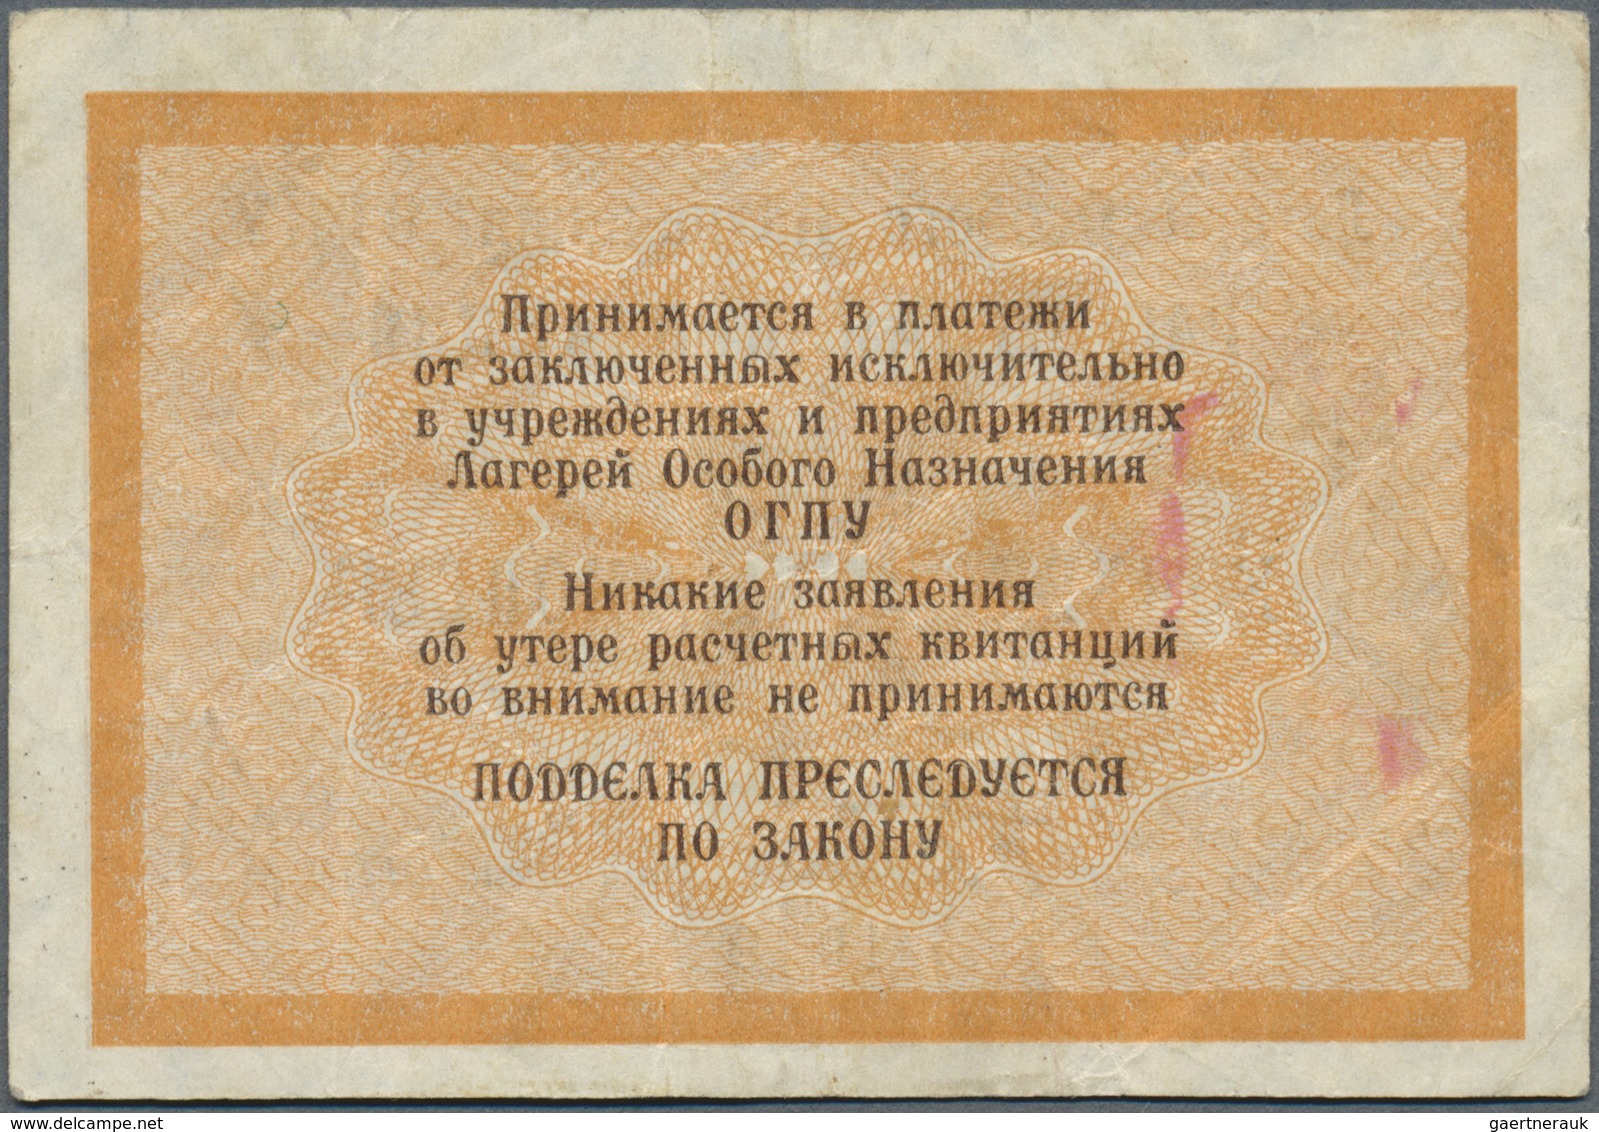 Russia / Russland: Concentration Camp OGPU Sberia 5 Kopeks 1929, Campbell 7276a In Fine Condition. R - Russia